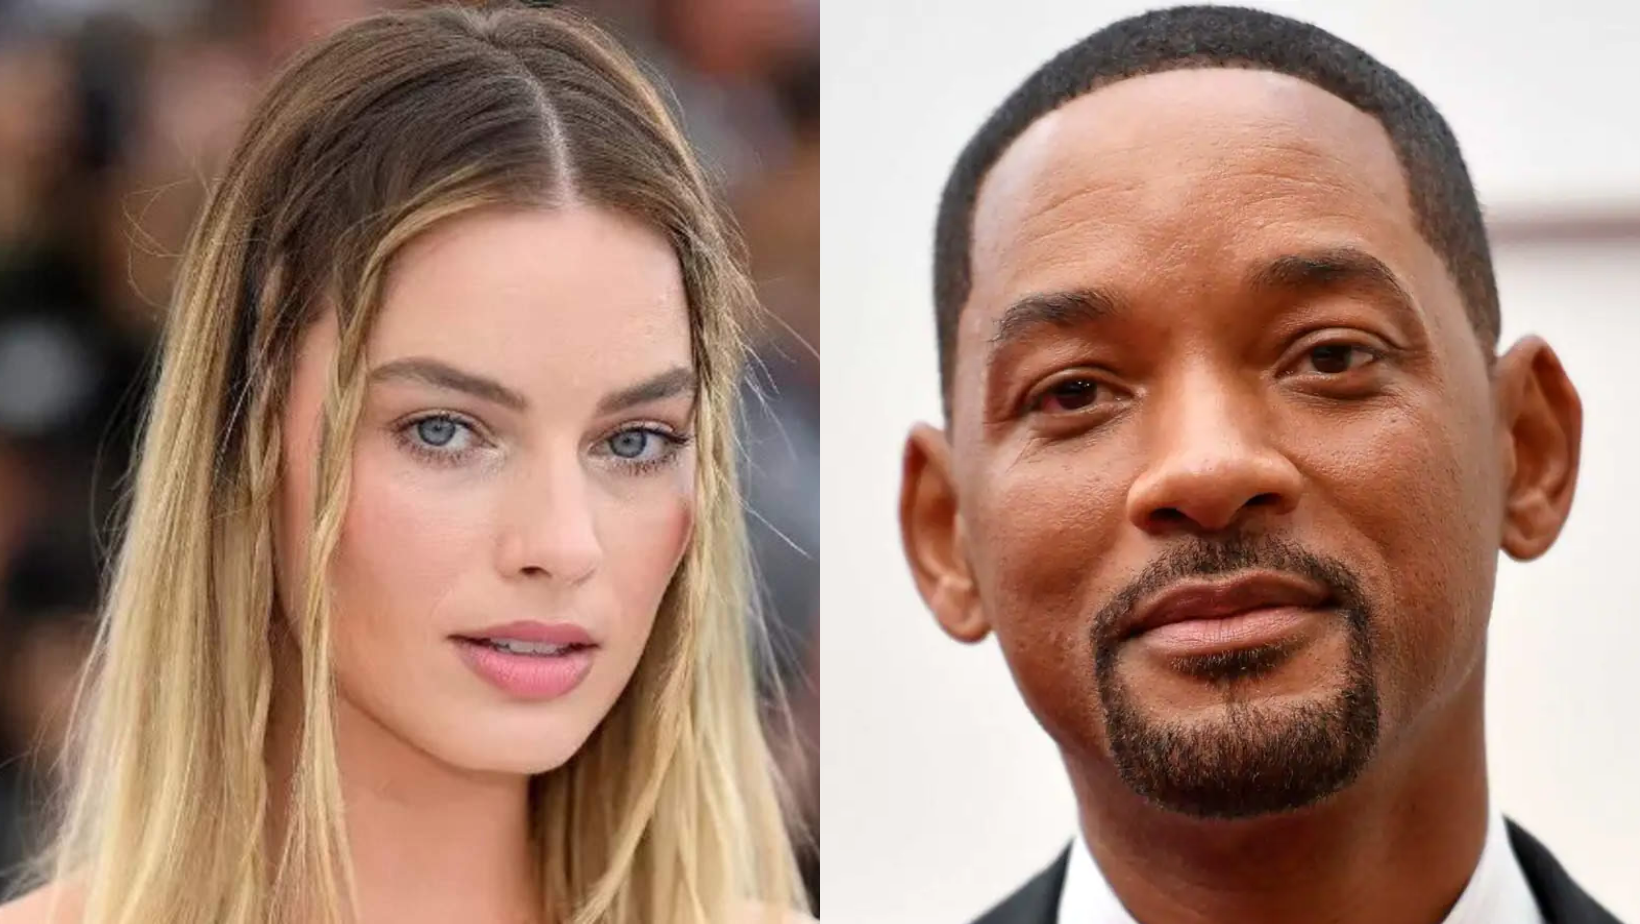 Fans are delighted with resurfaced photos of Will Smith with Margot Robbie

+2023